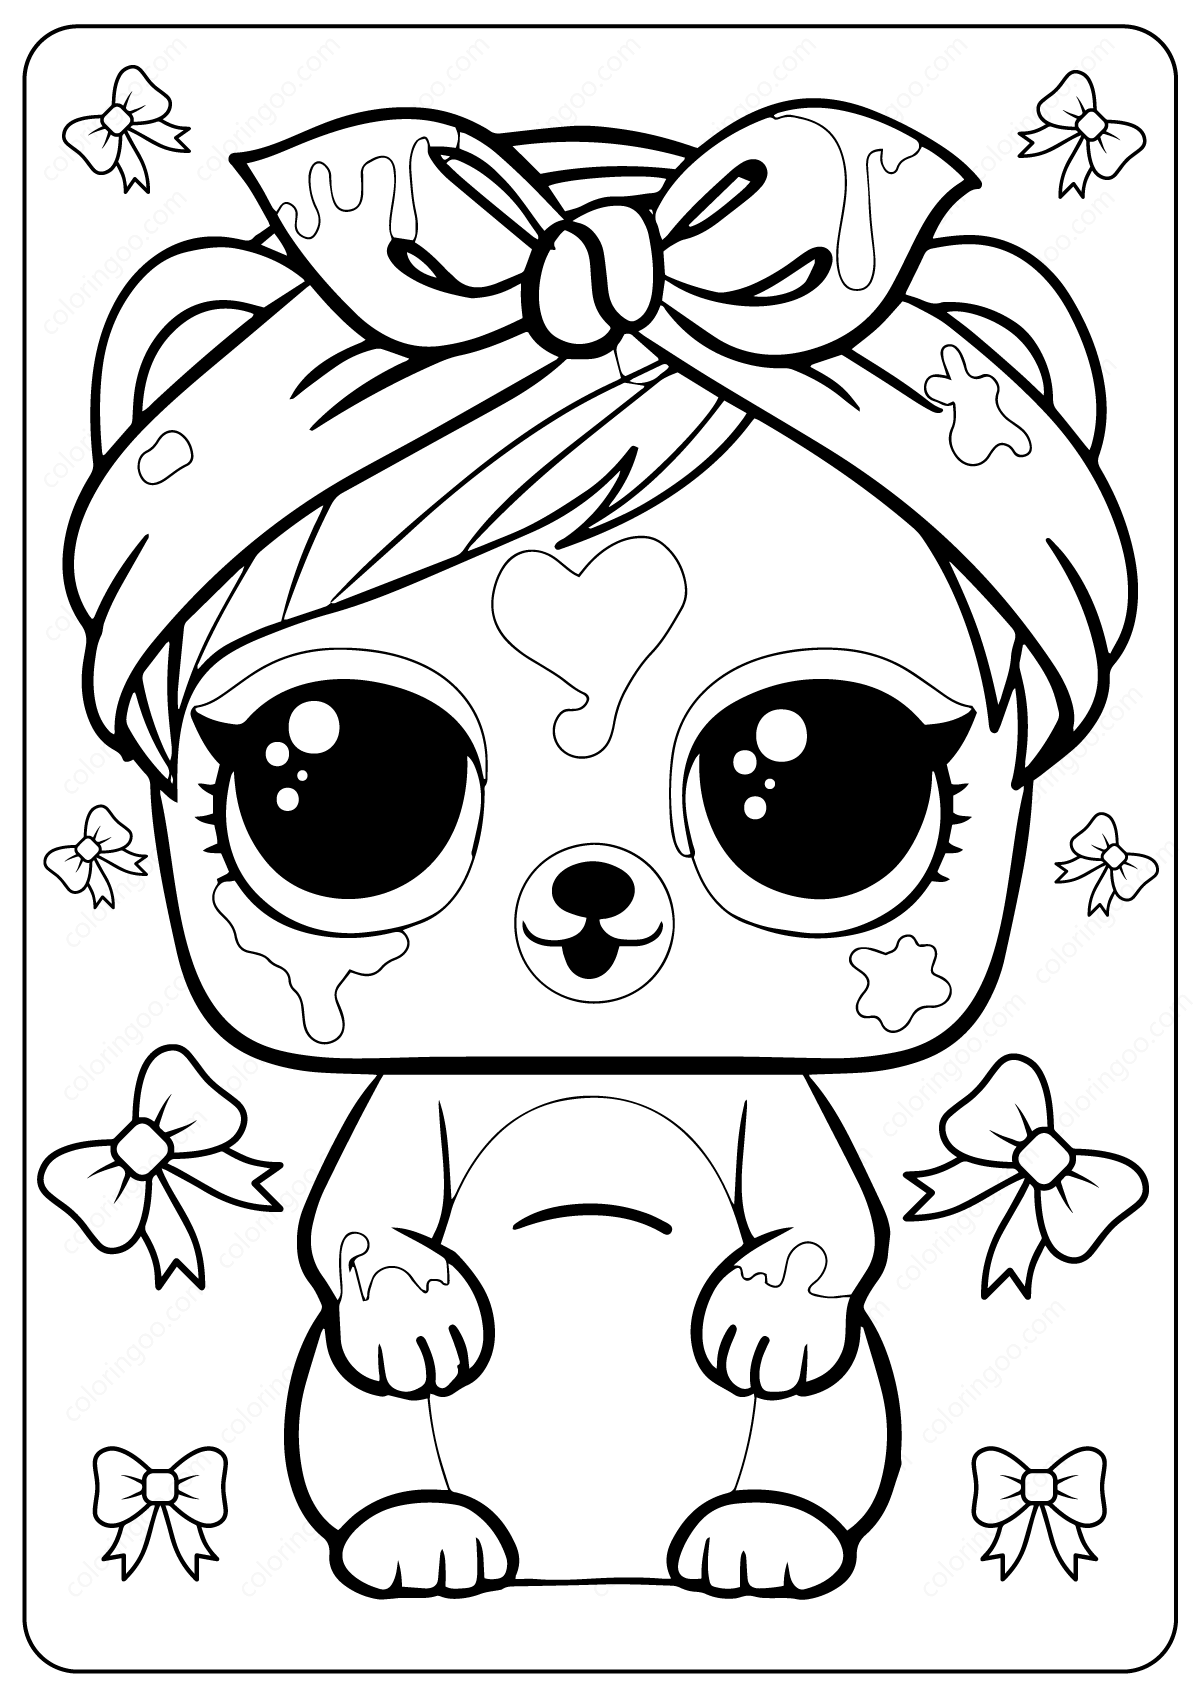 LOL Coloring Pages FREE Printable 43